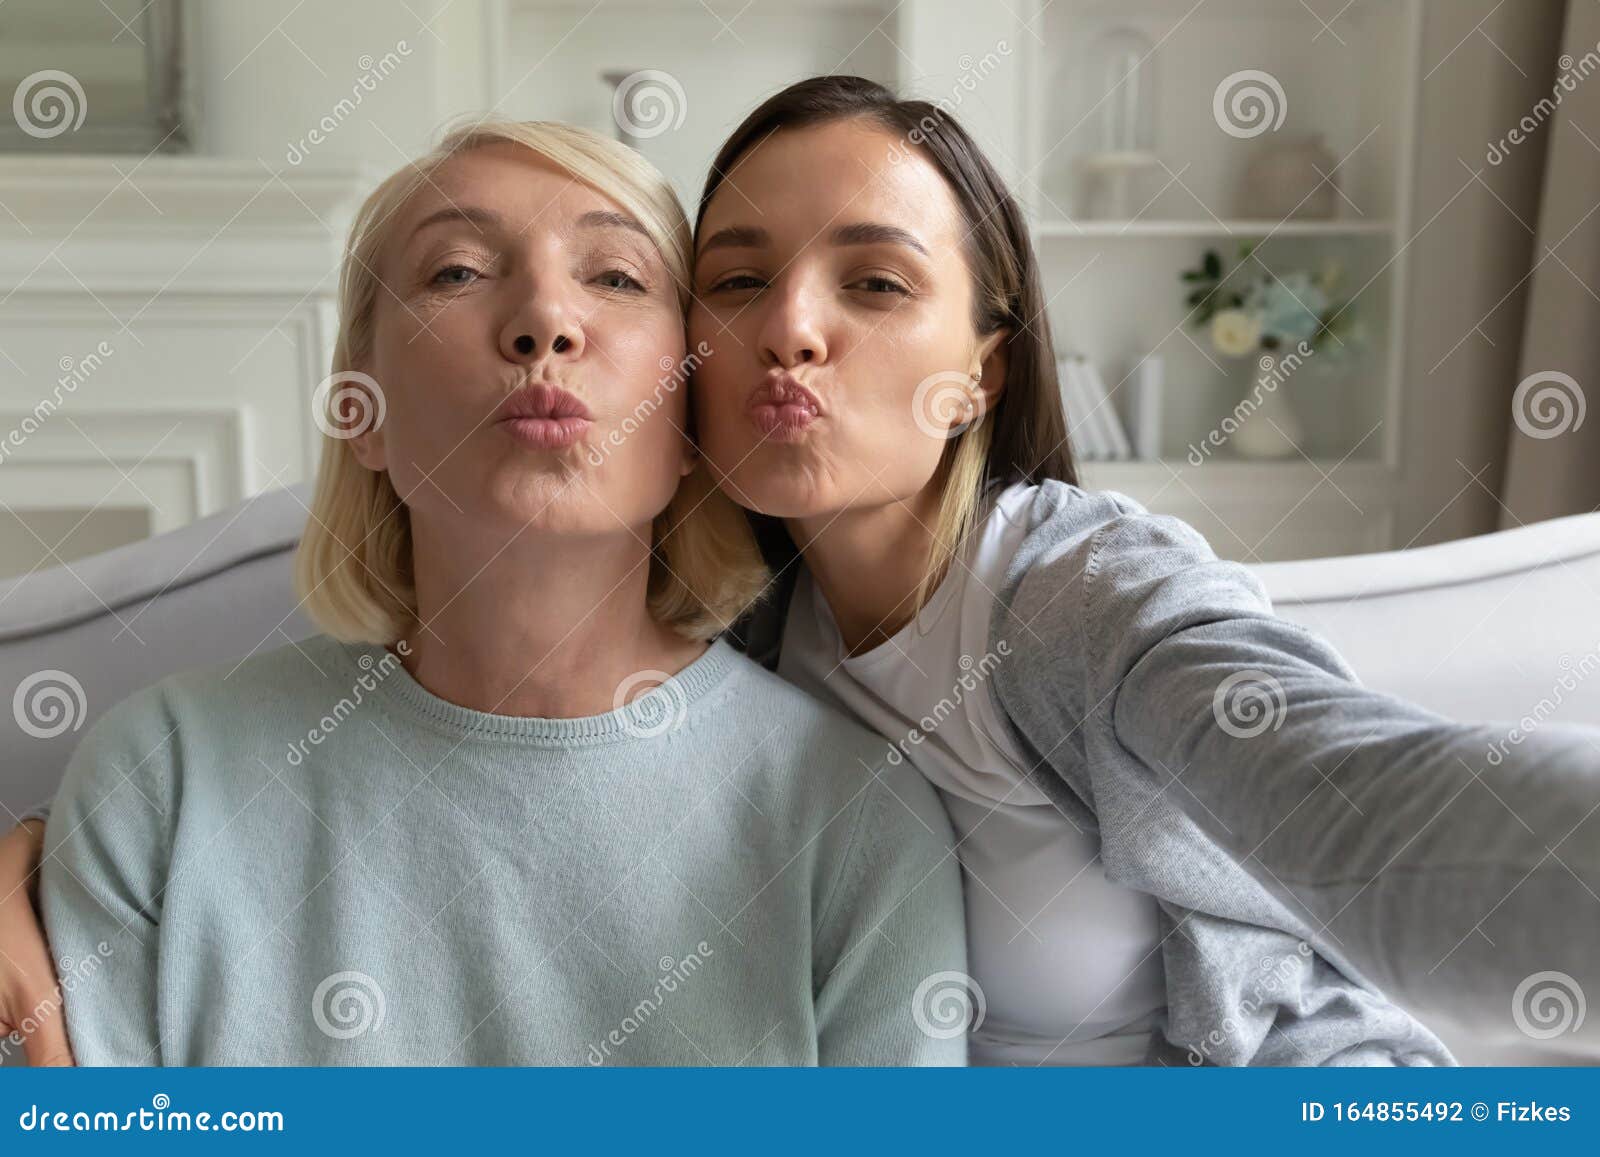 babsy angel recommends mother daughter webcam pic